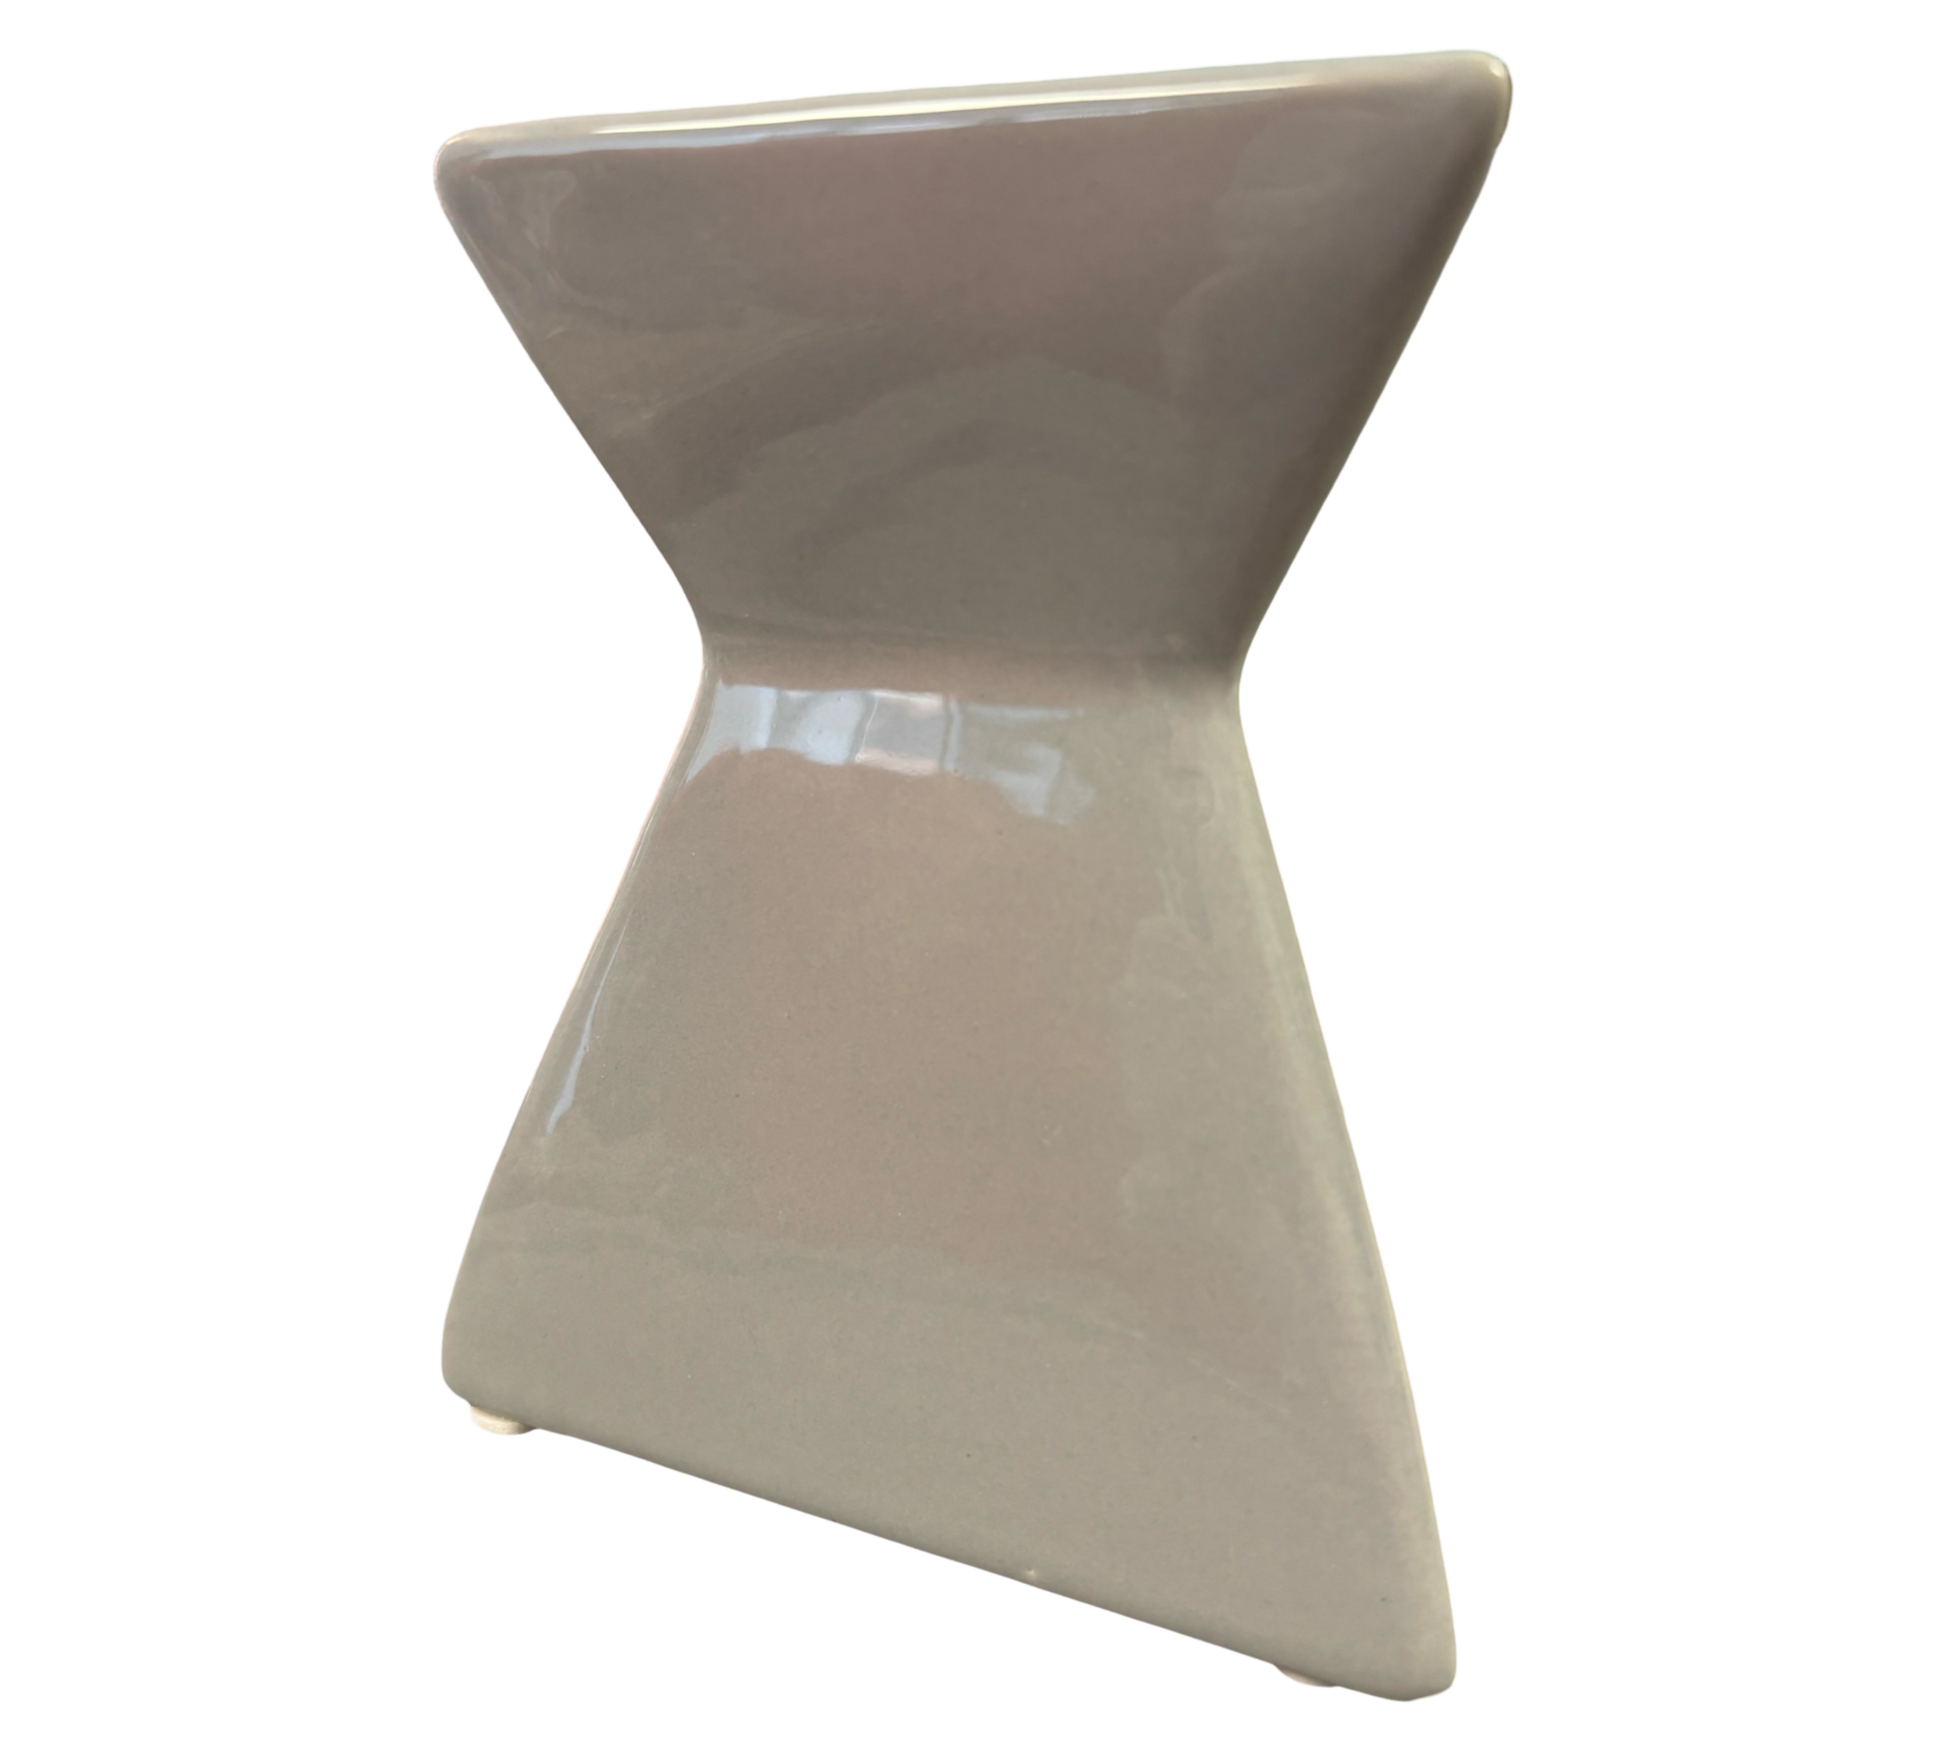 A ceramic hourglass-shaped vase with a glossy finish, designed as a Triangle Grey Gloss Wax Melt & Oil Warmer, isolated on a black background by The Soap Gal x.